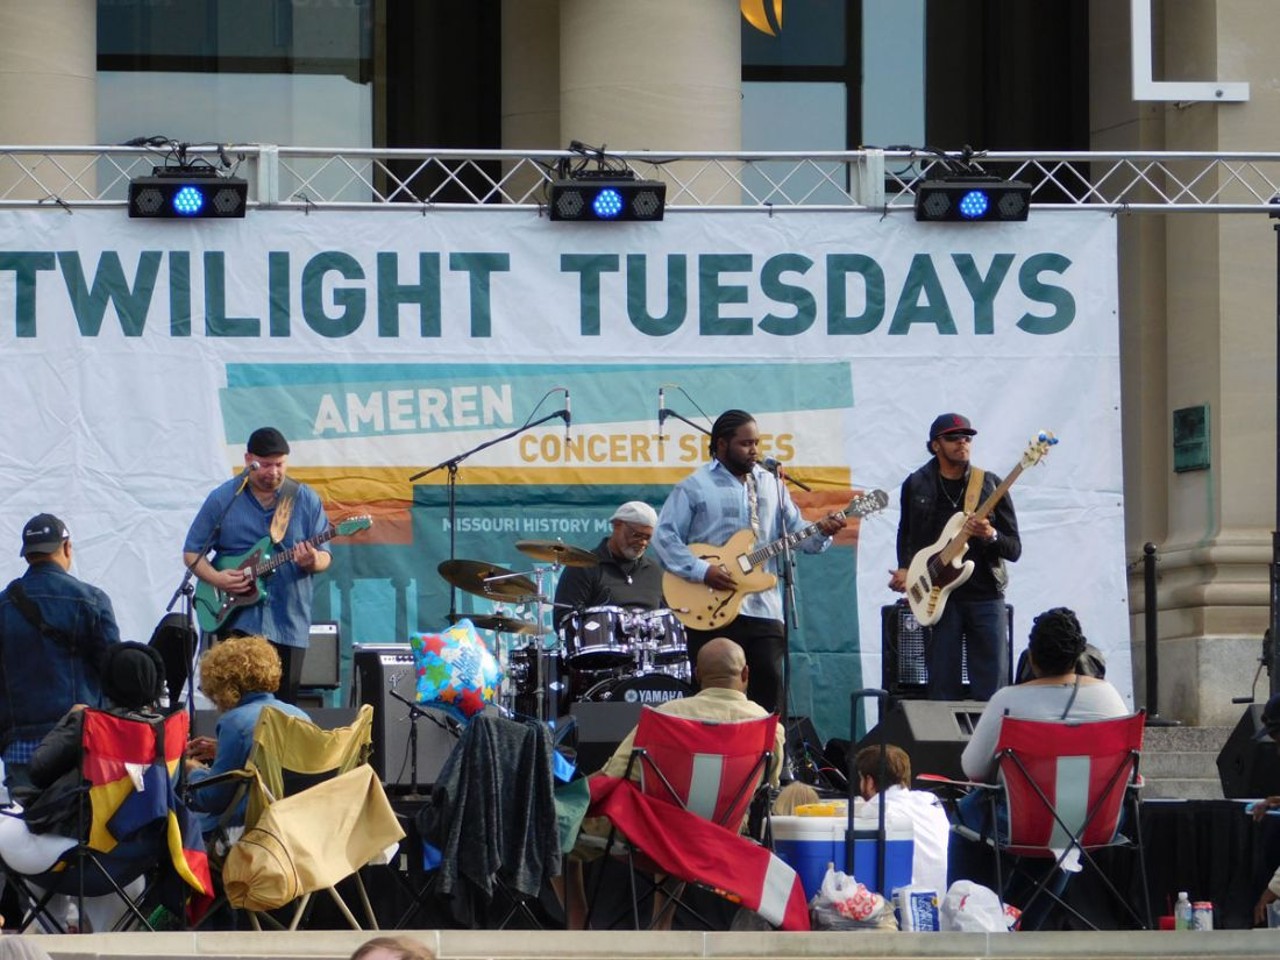 Check Out All the Fun From Last Week's Twilight Tuesday